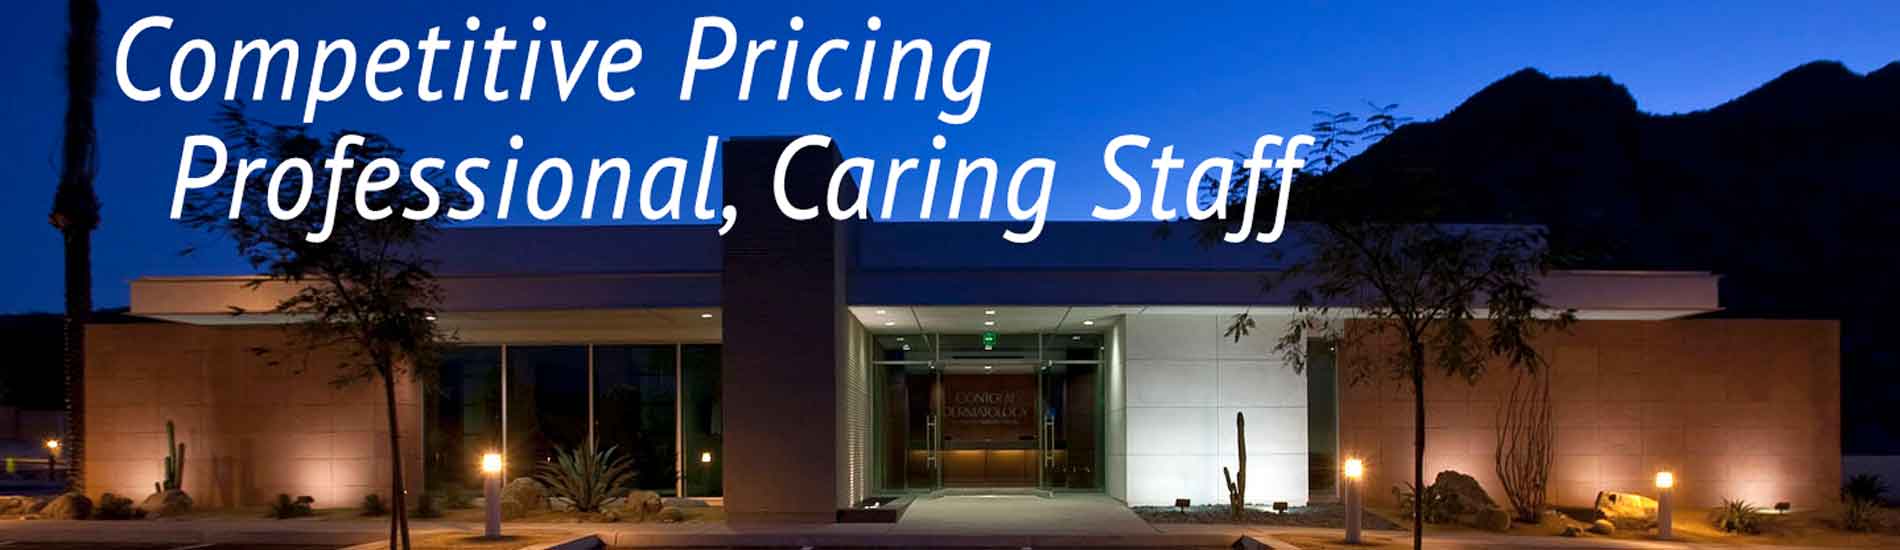 Competitive Pricing, Professional, Caring Staff